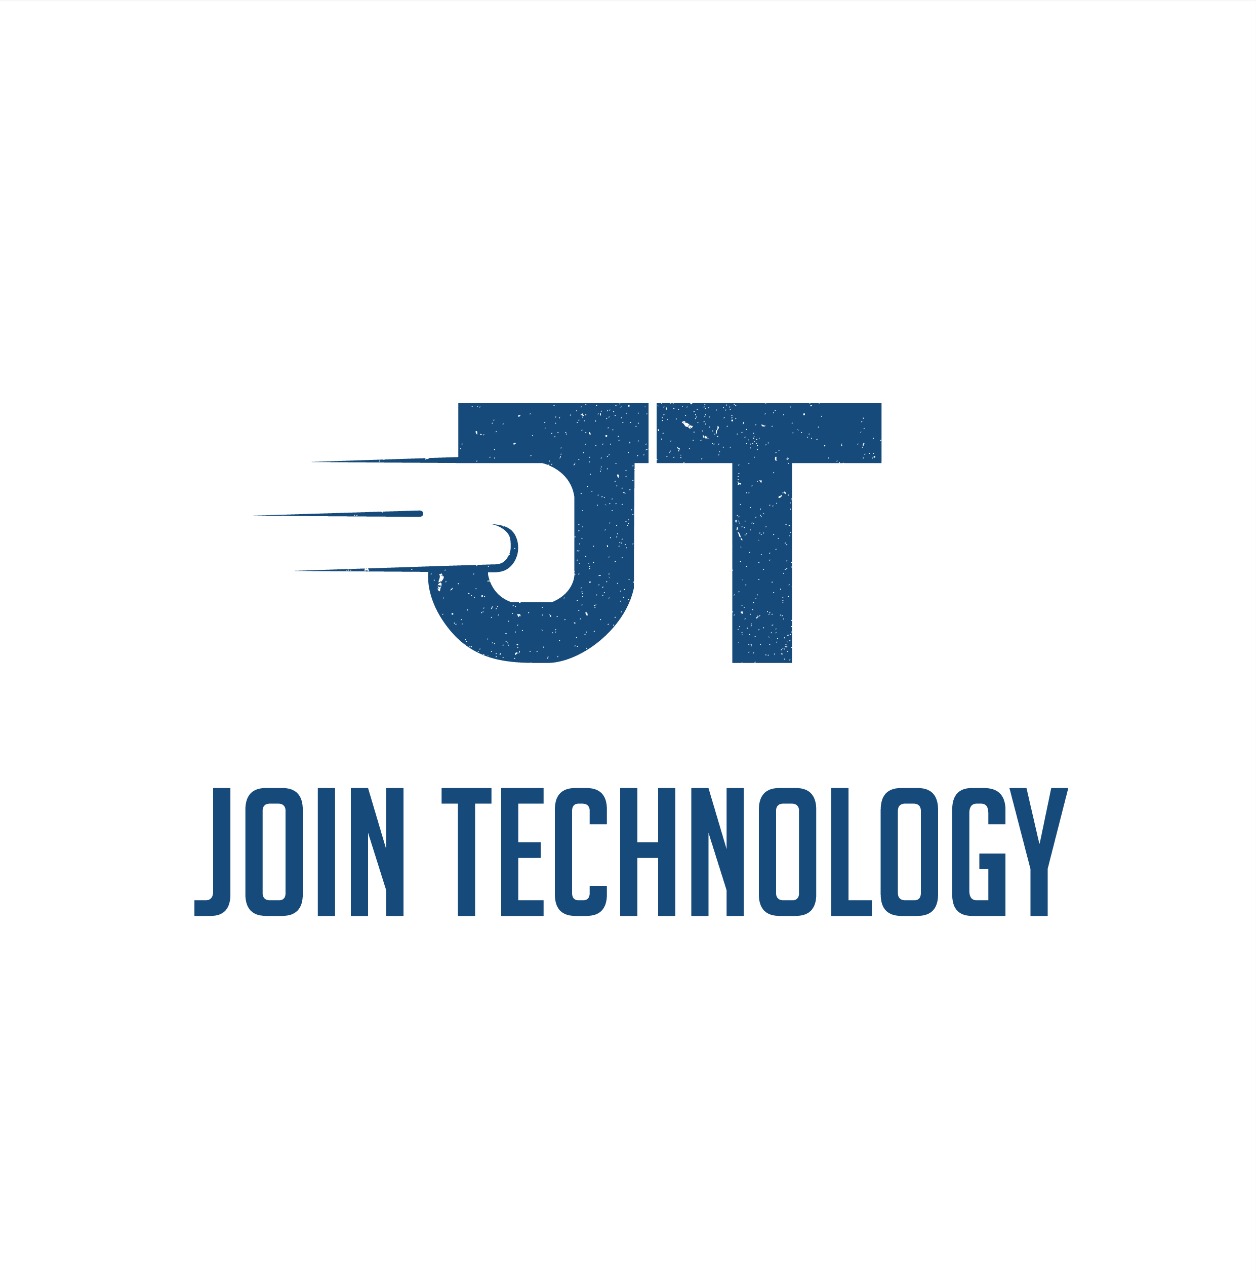 Join Technology